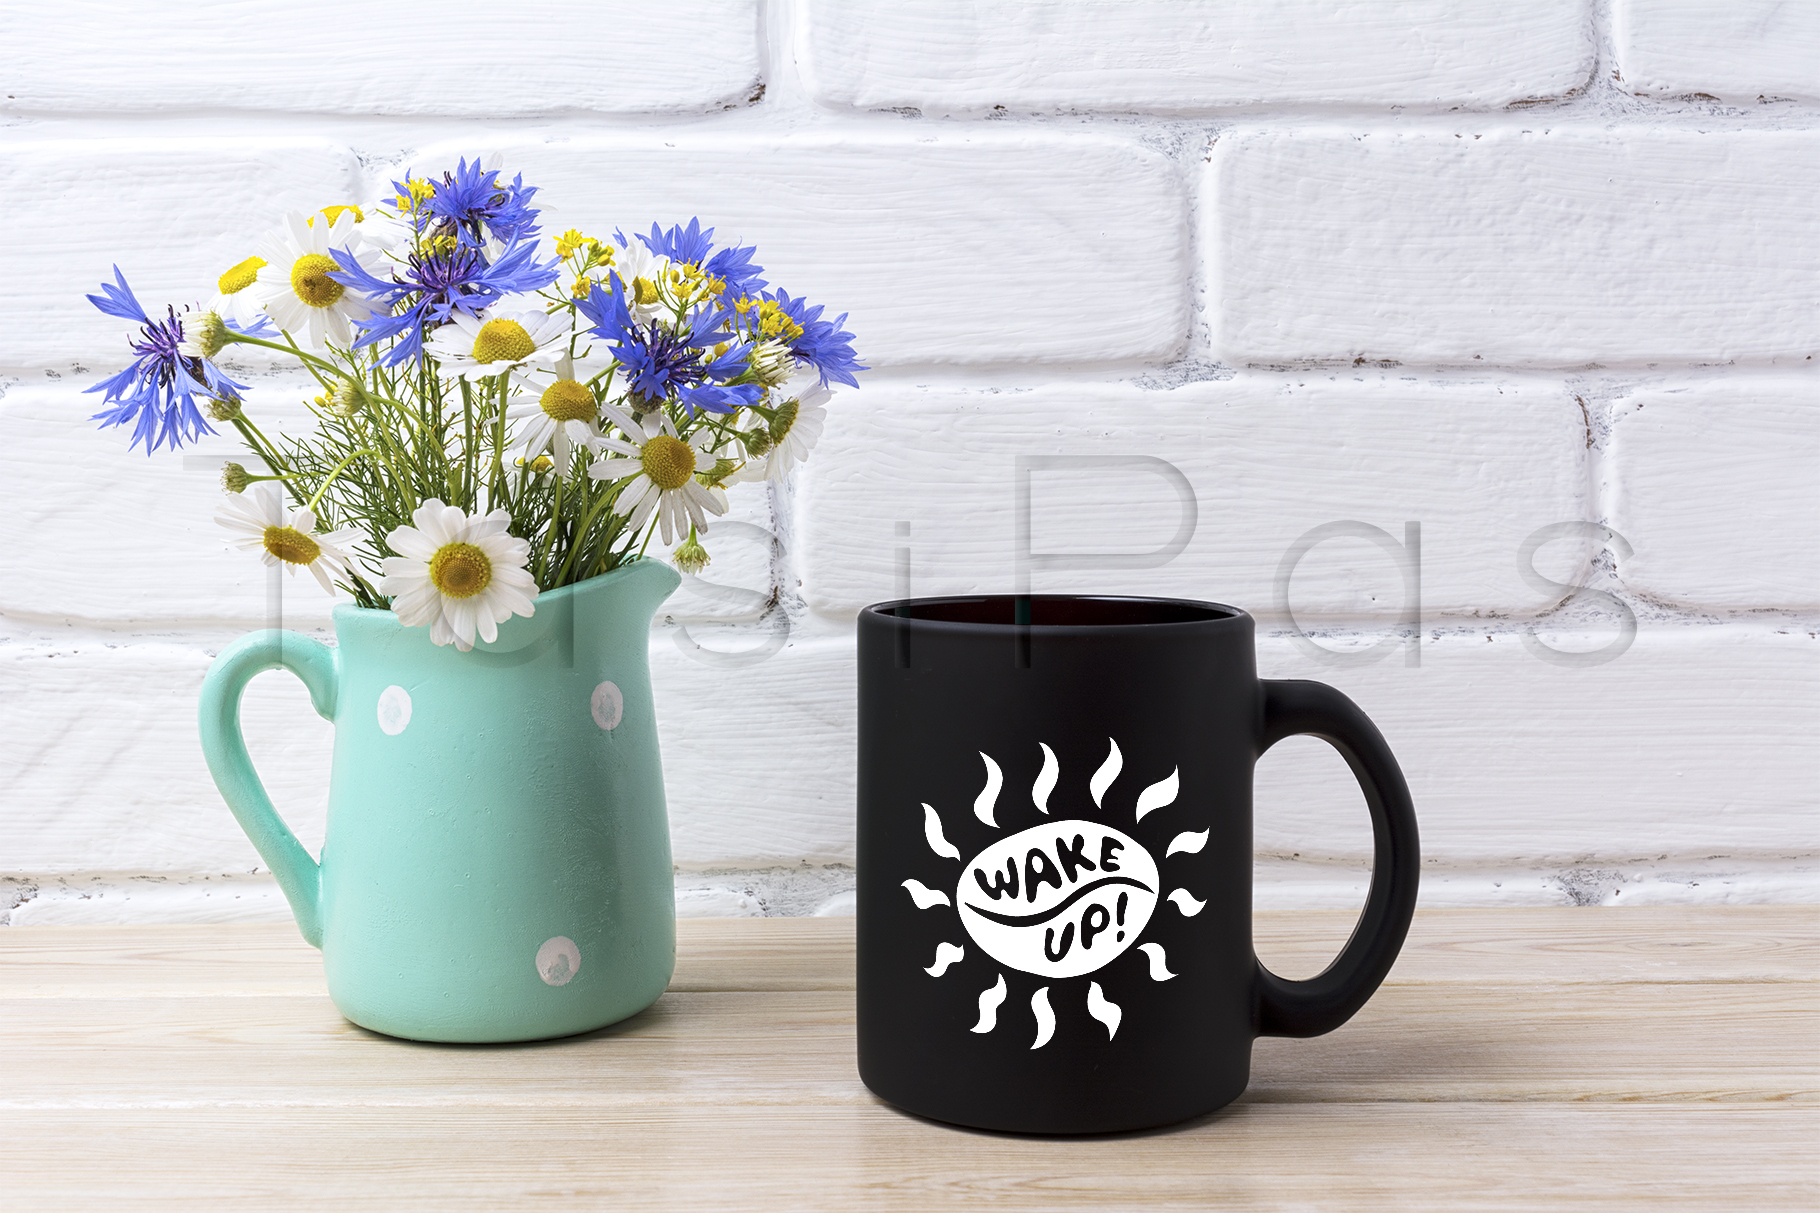 Download Black coffee mug mockup with cornflower and daisy in pitcher